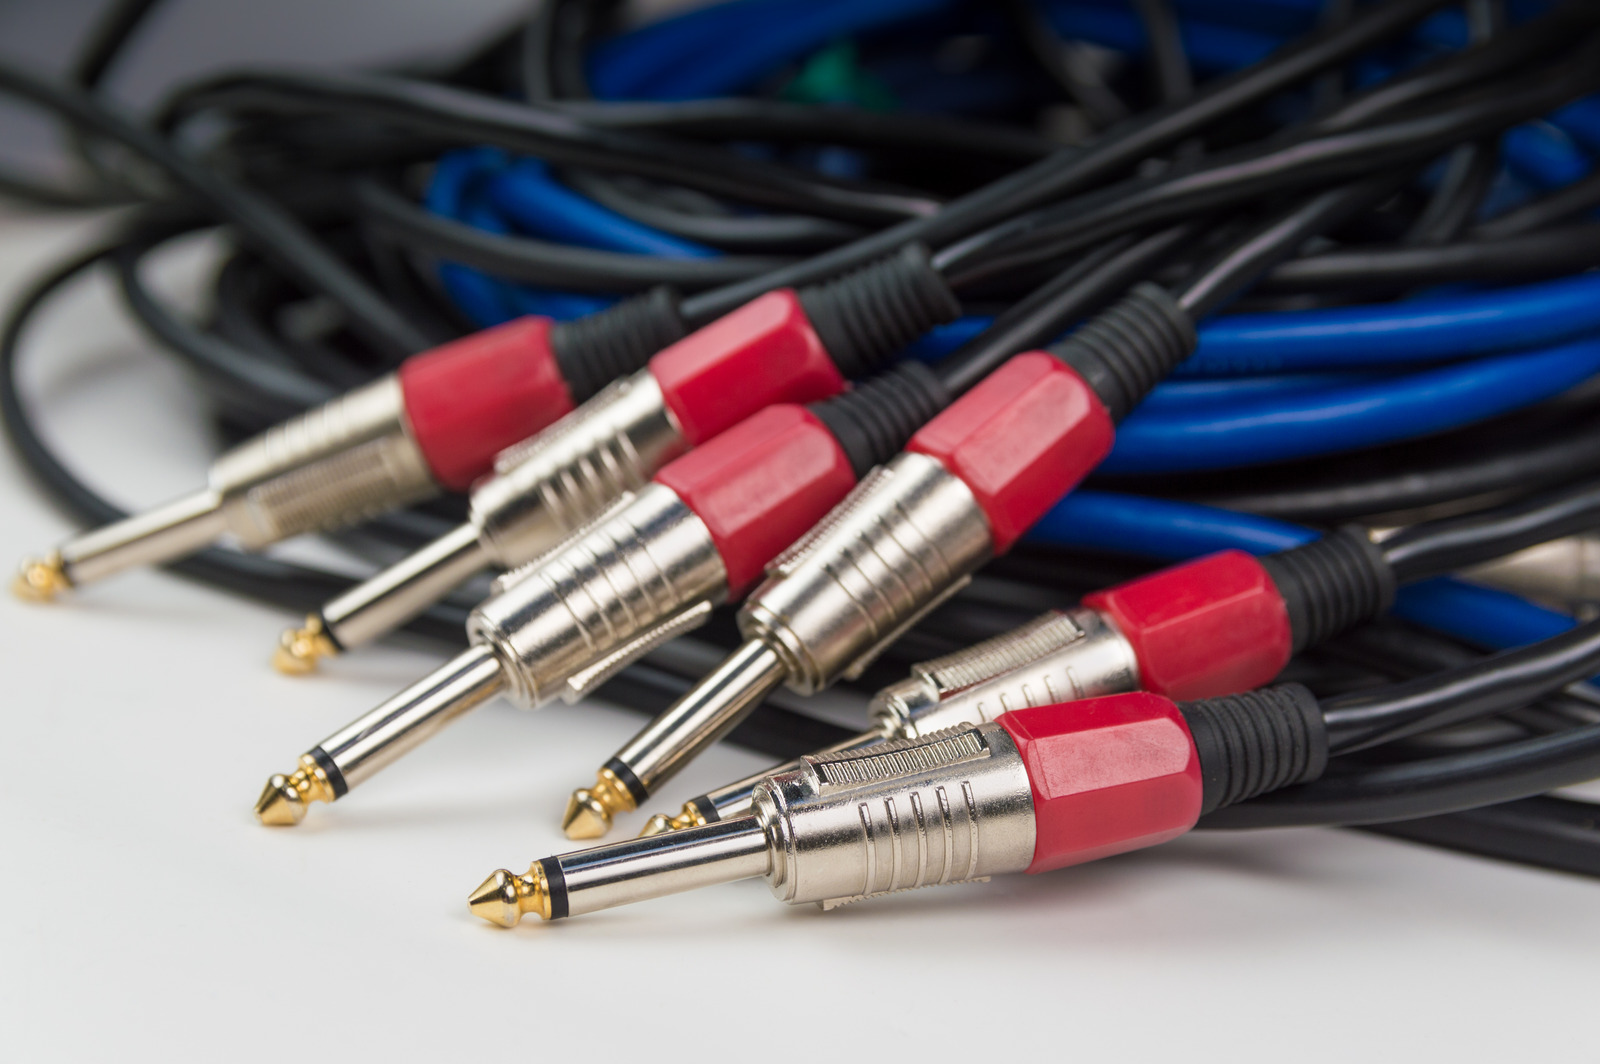 Blue and black audio cables with mono TRS connectors, lie on a white table.